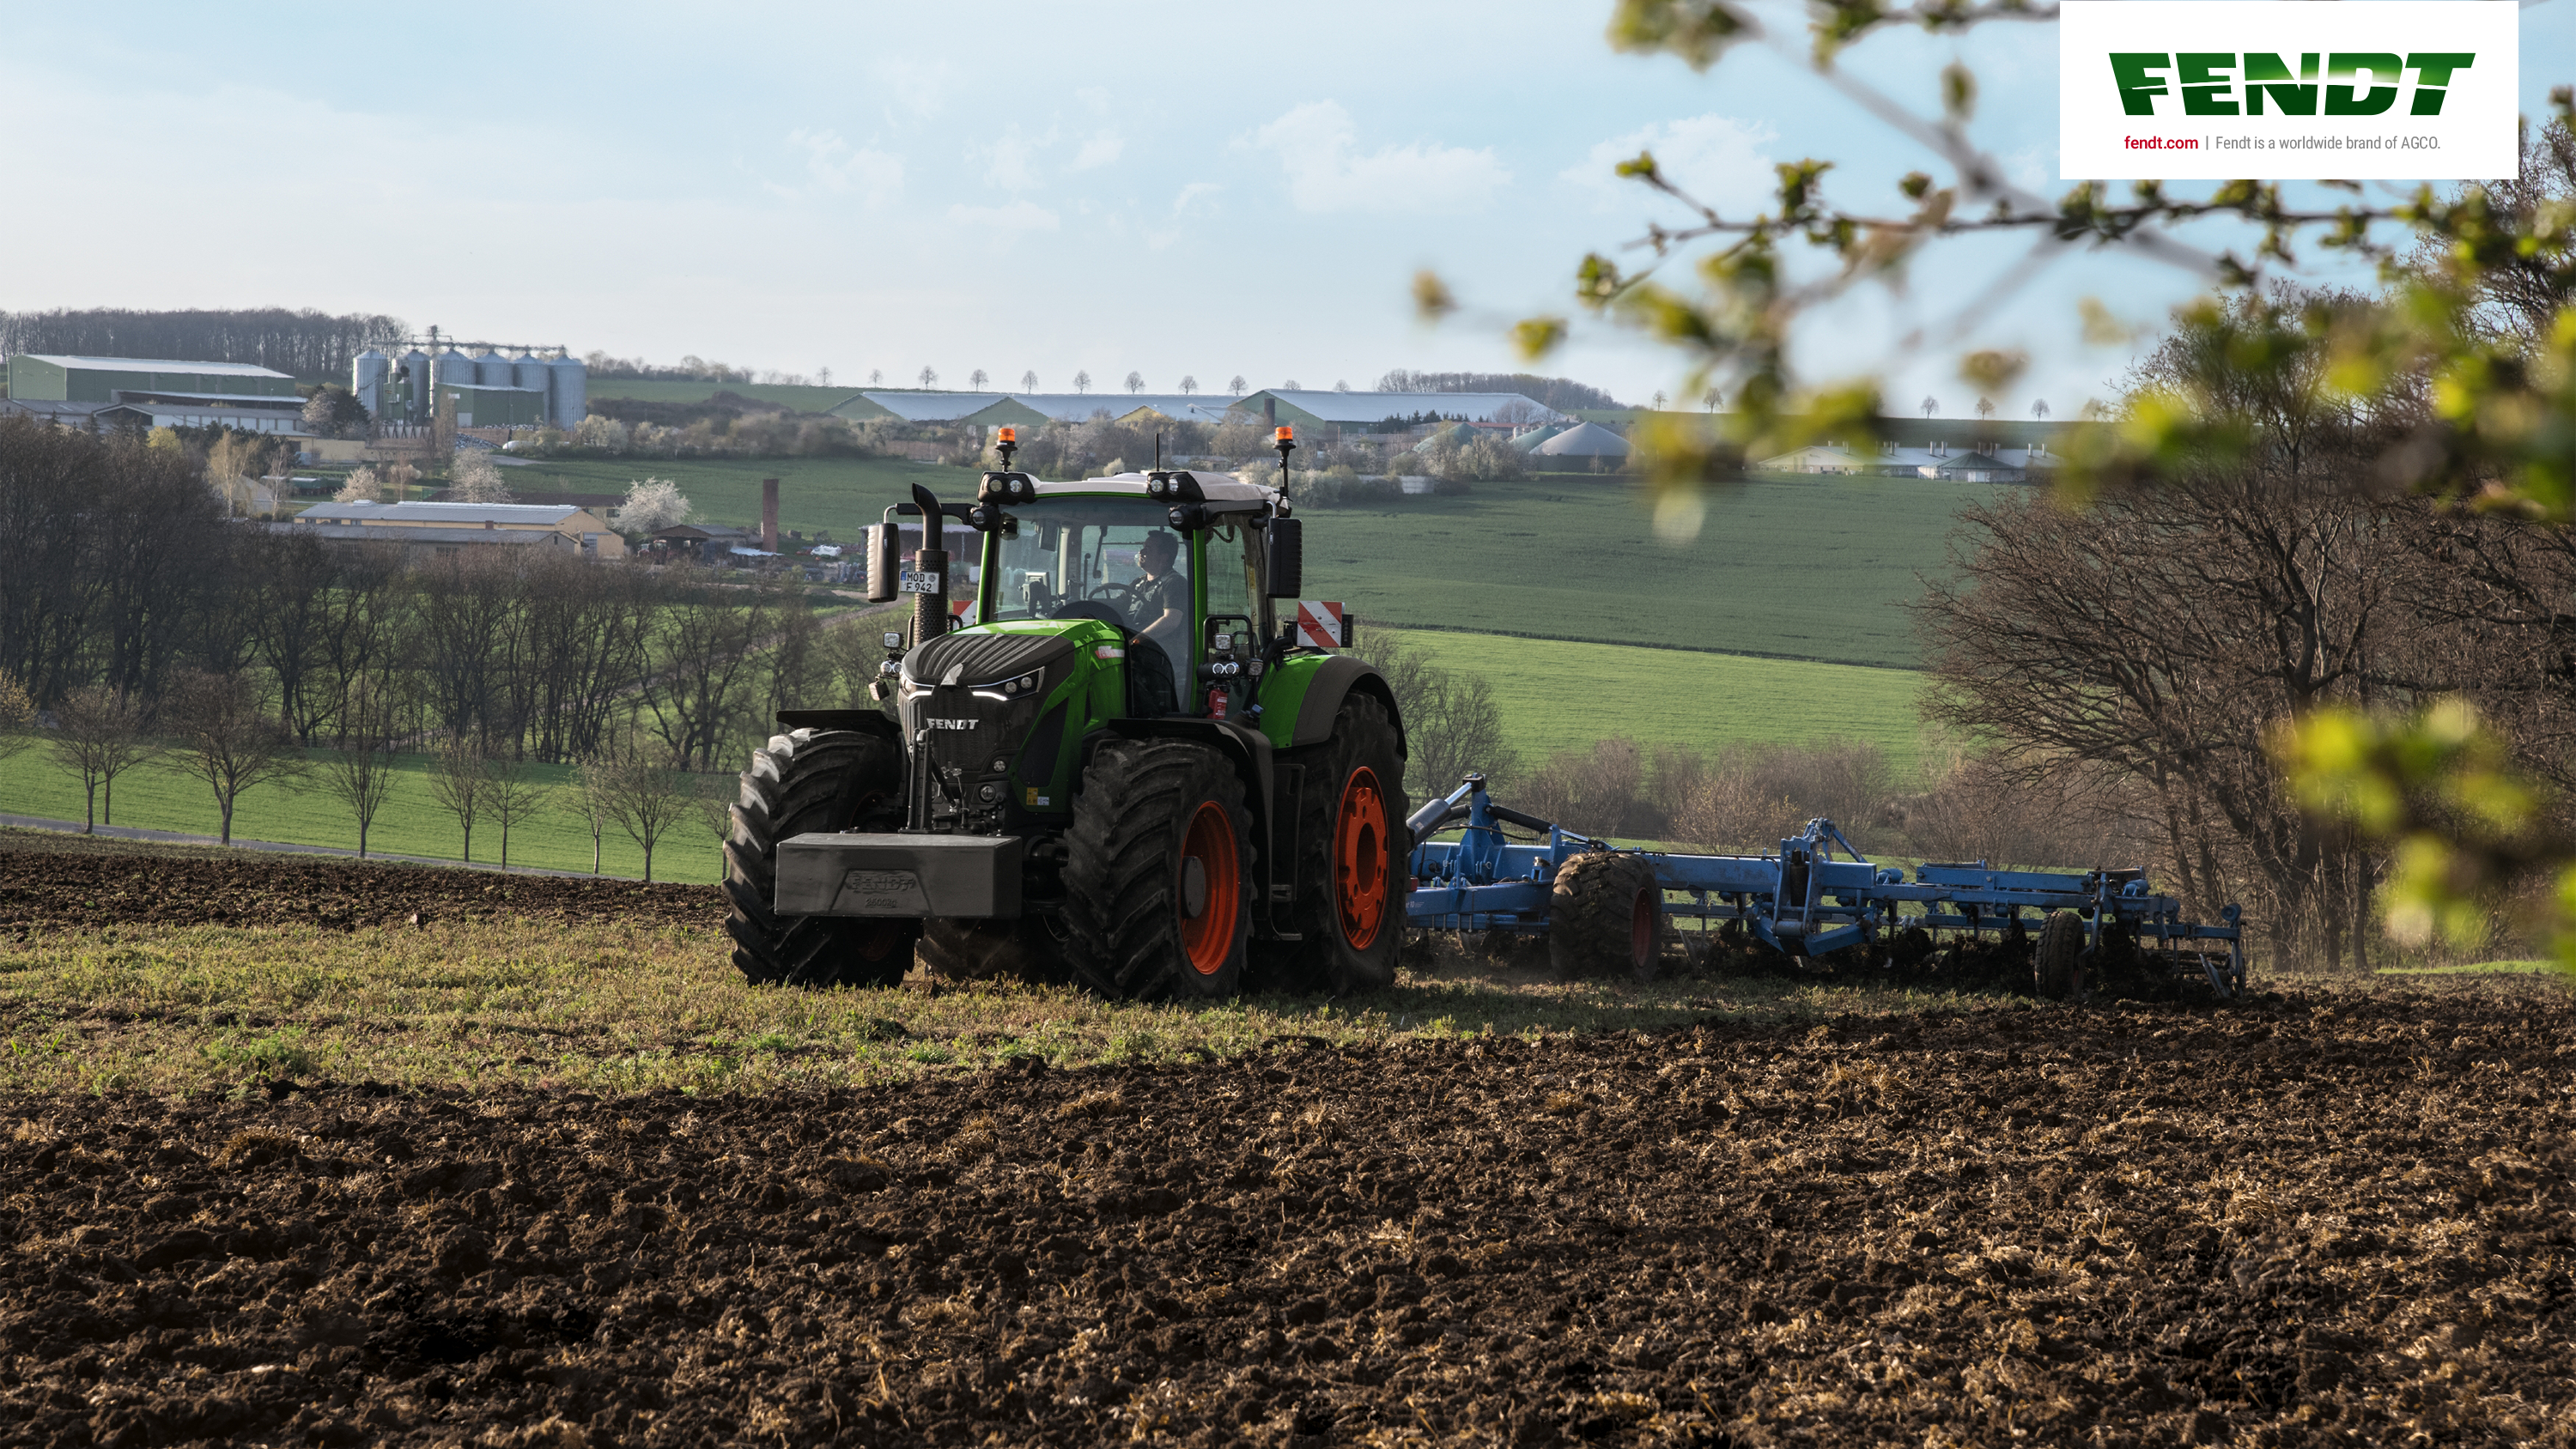 3000x1688 Our Fendt wallpapers select, download, and use individually